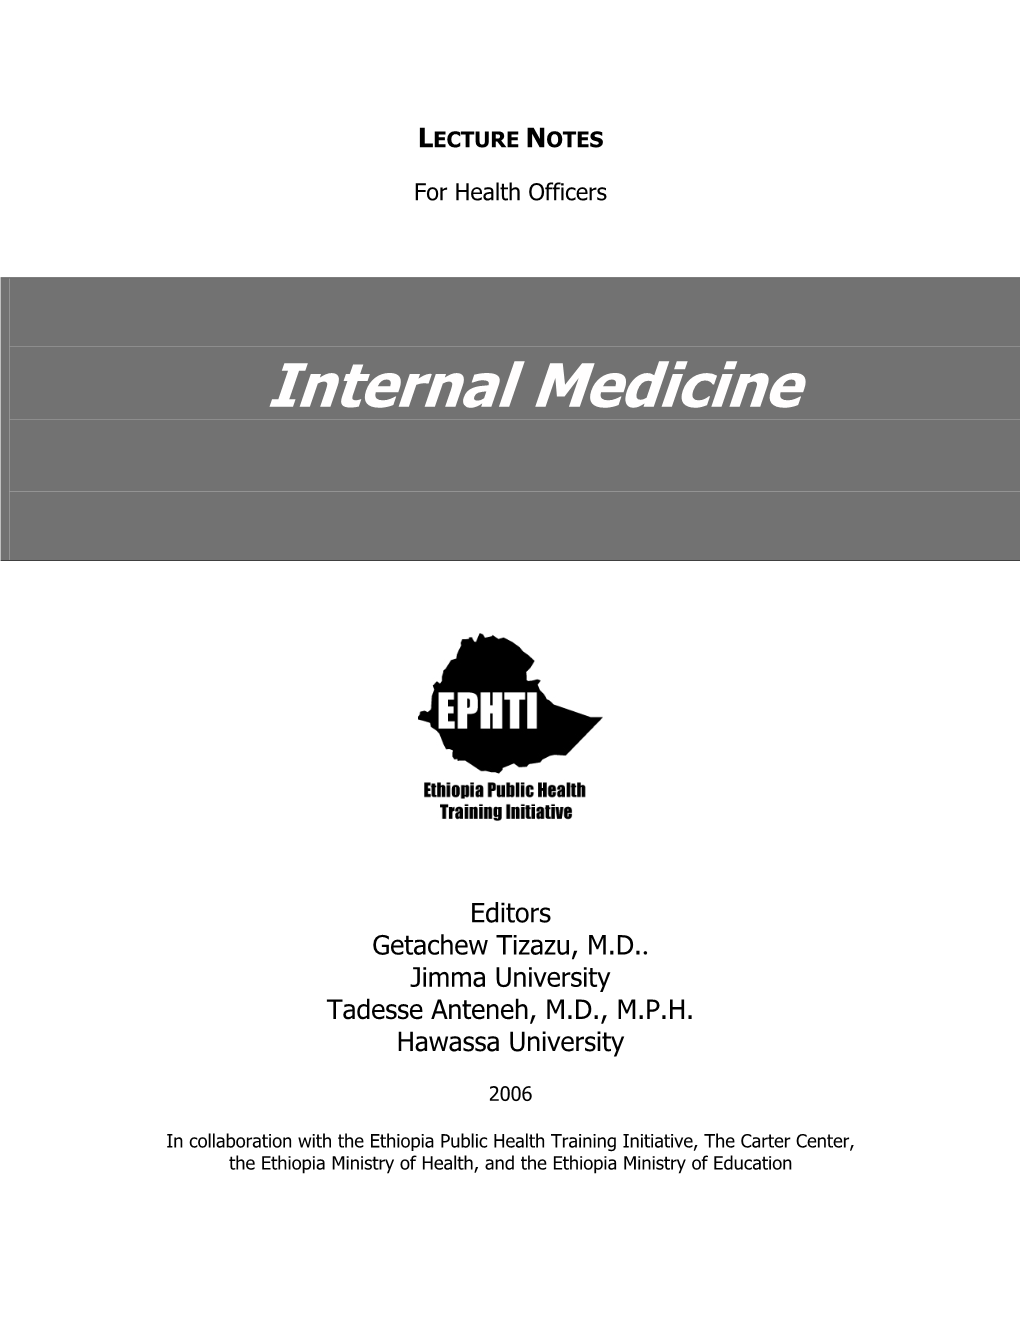 Lecture Notes on Internal Medicine